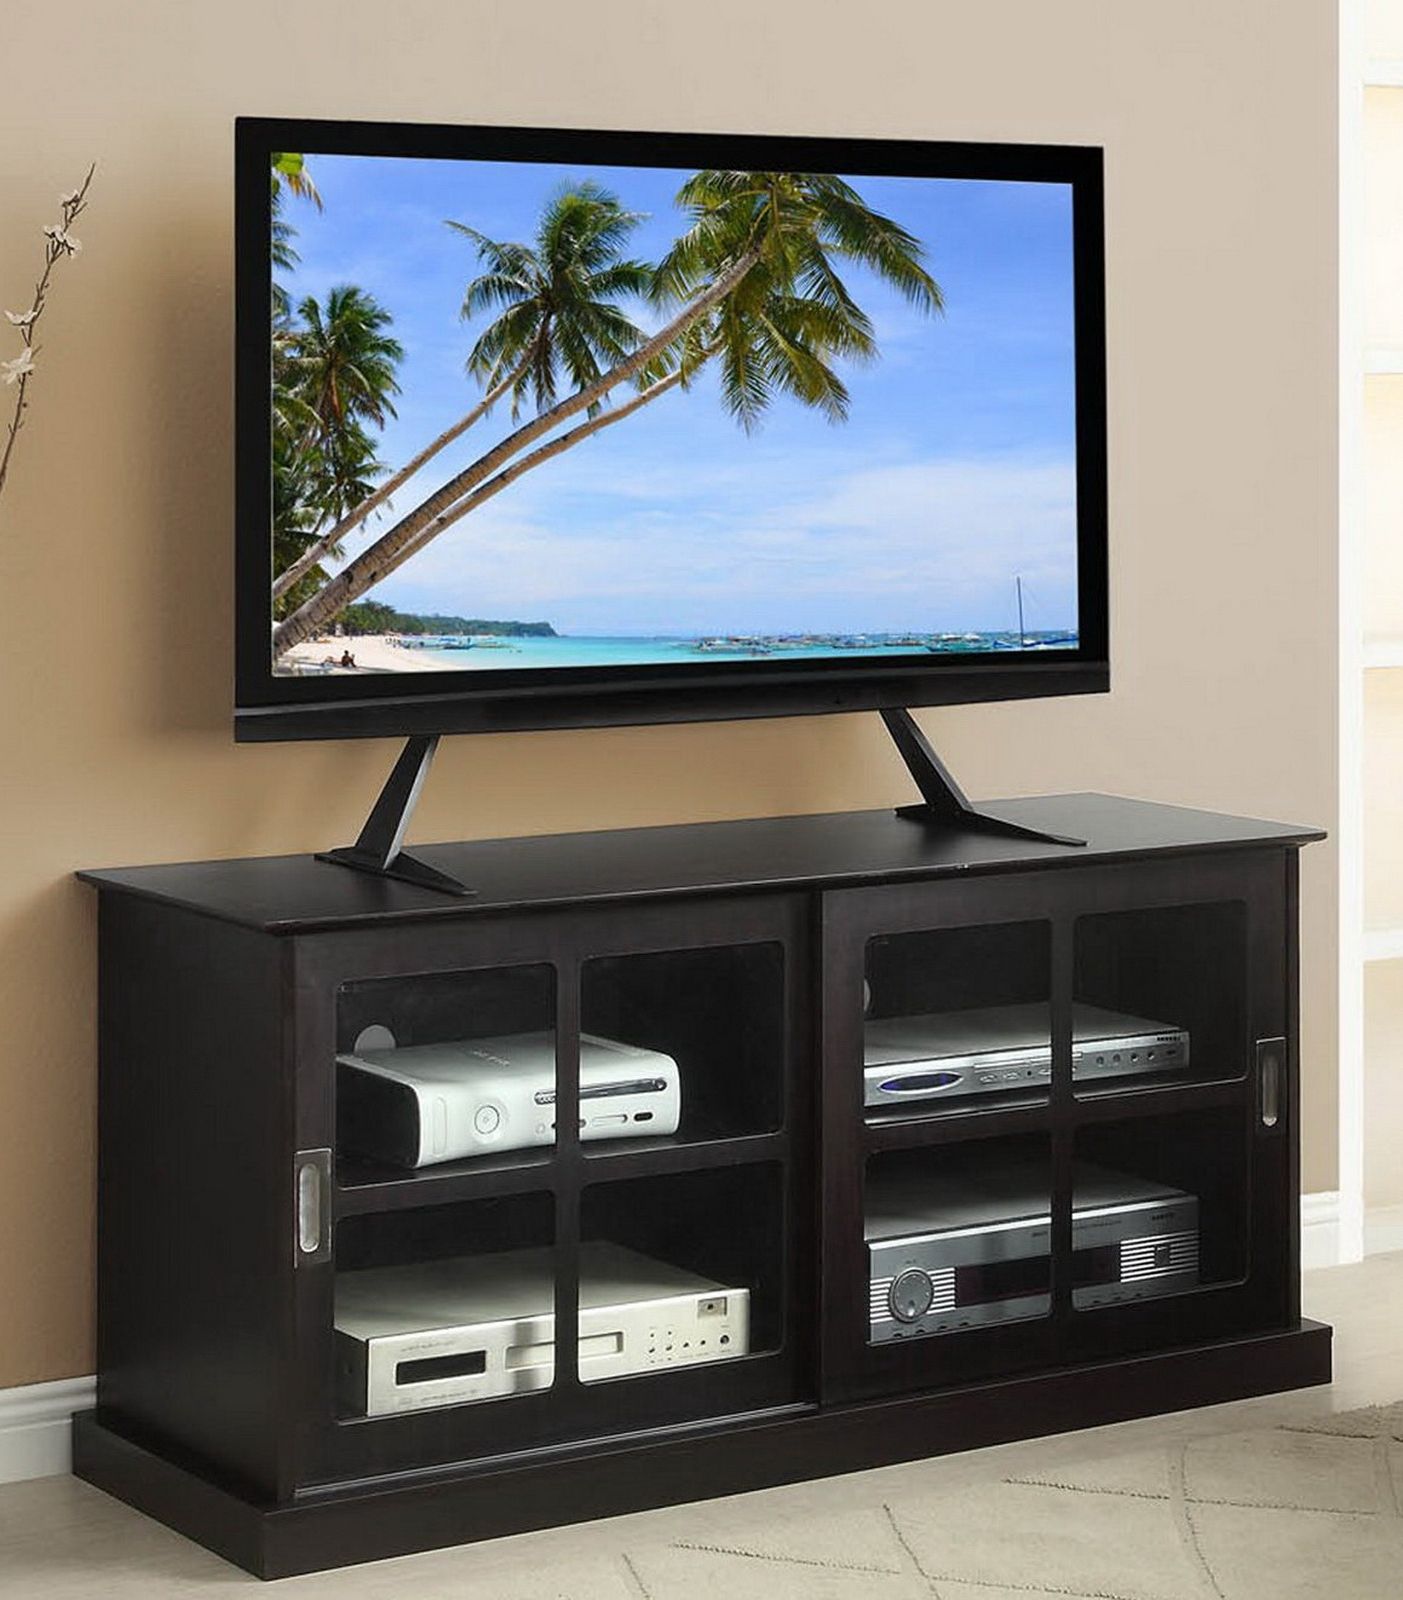 Table Top Flat Screen Tv Stand Pertaining To Tabletop Tv Stands Base With Black Metal Tv Mount (Gallery 19 of 20)